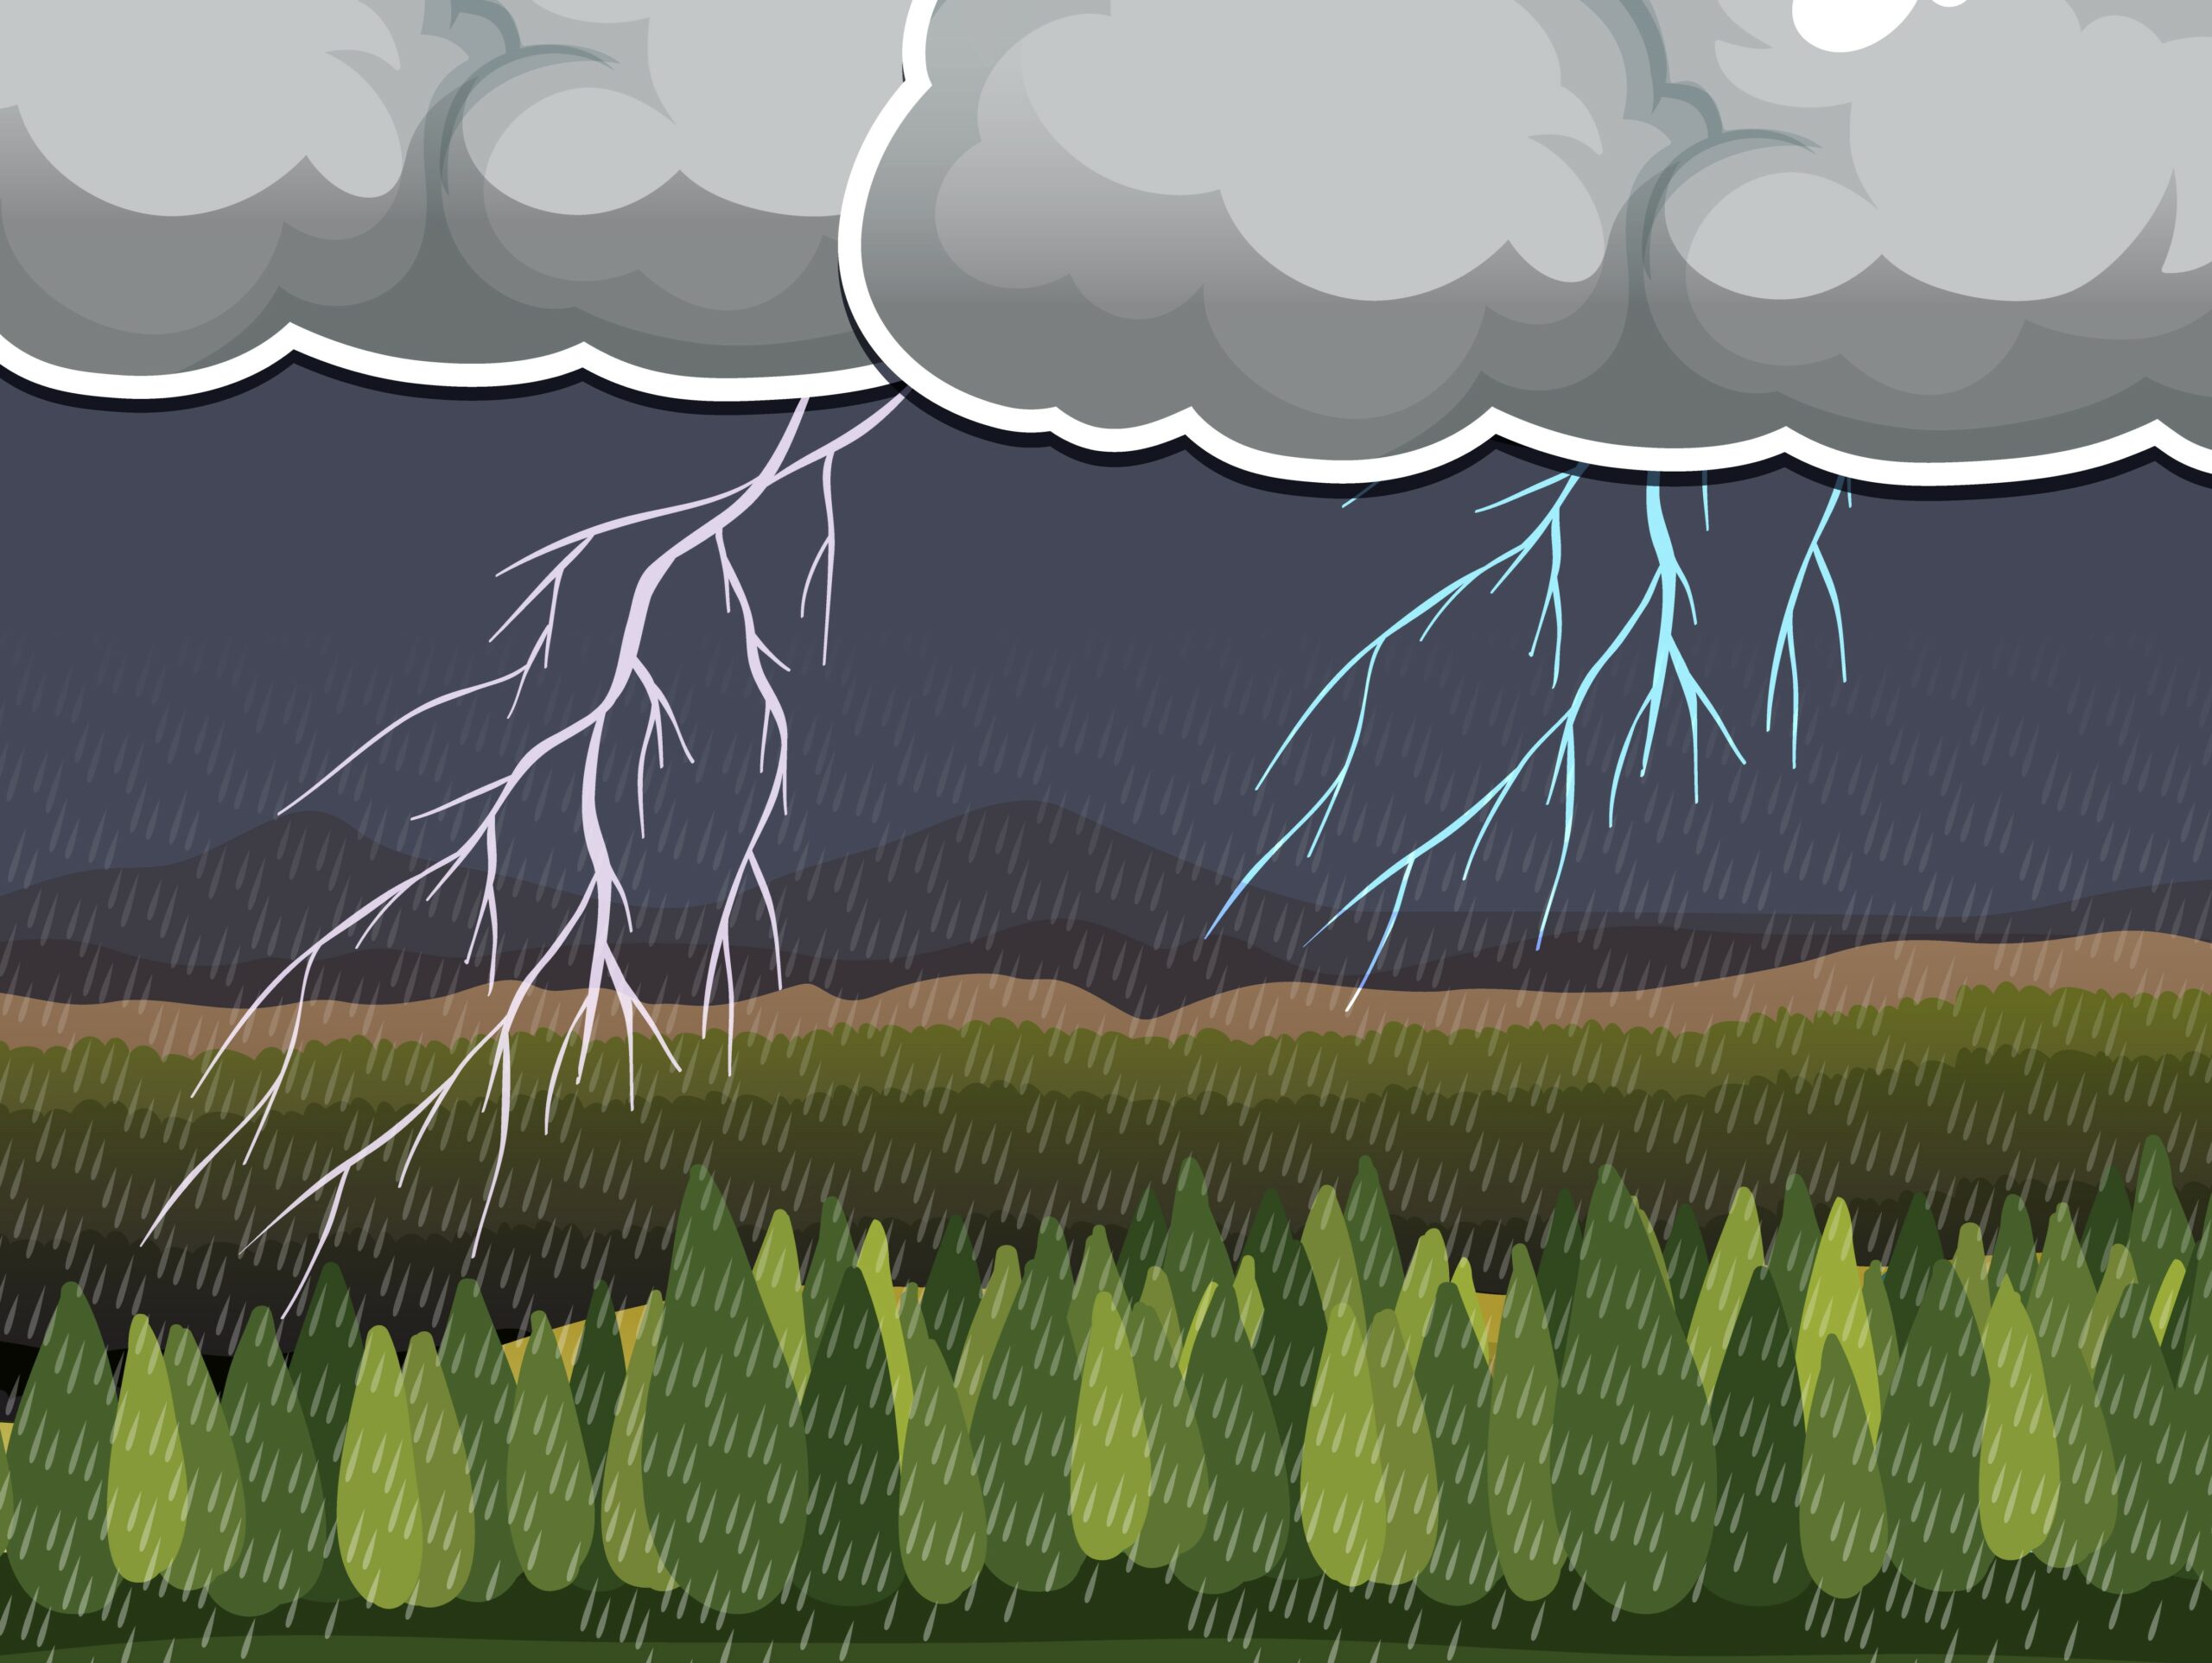 Thumbnail design with raining and lightning in nature landscape